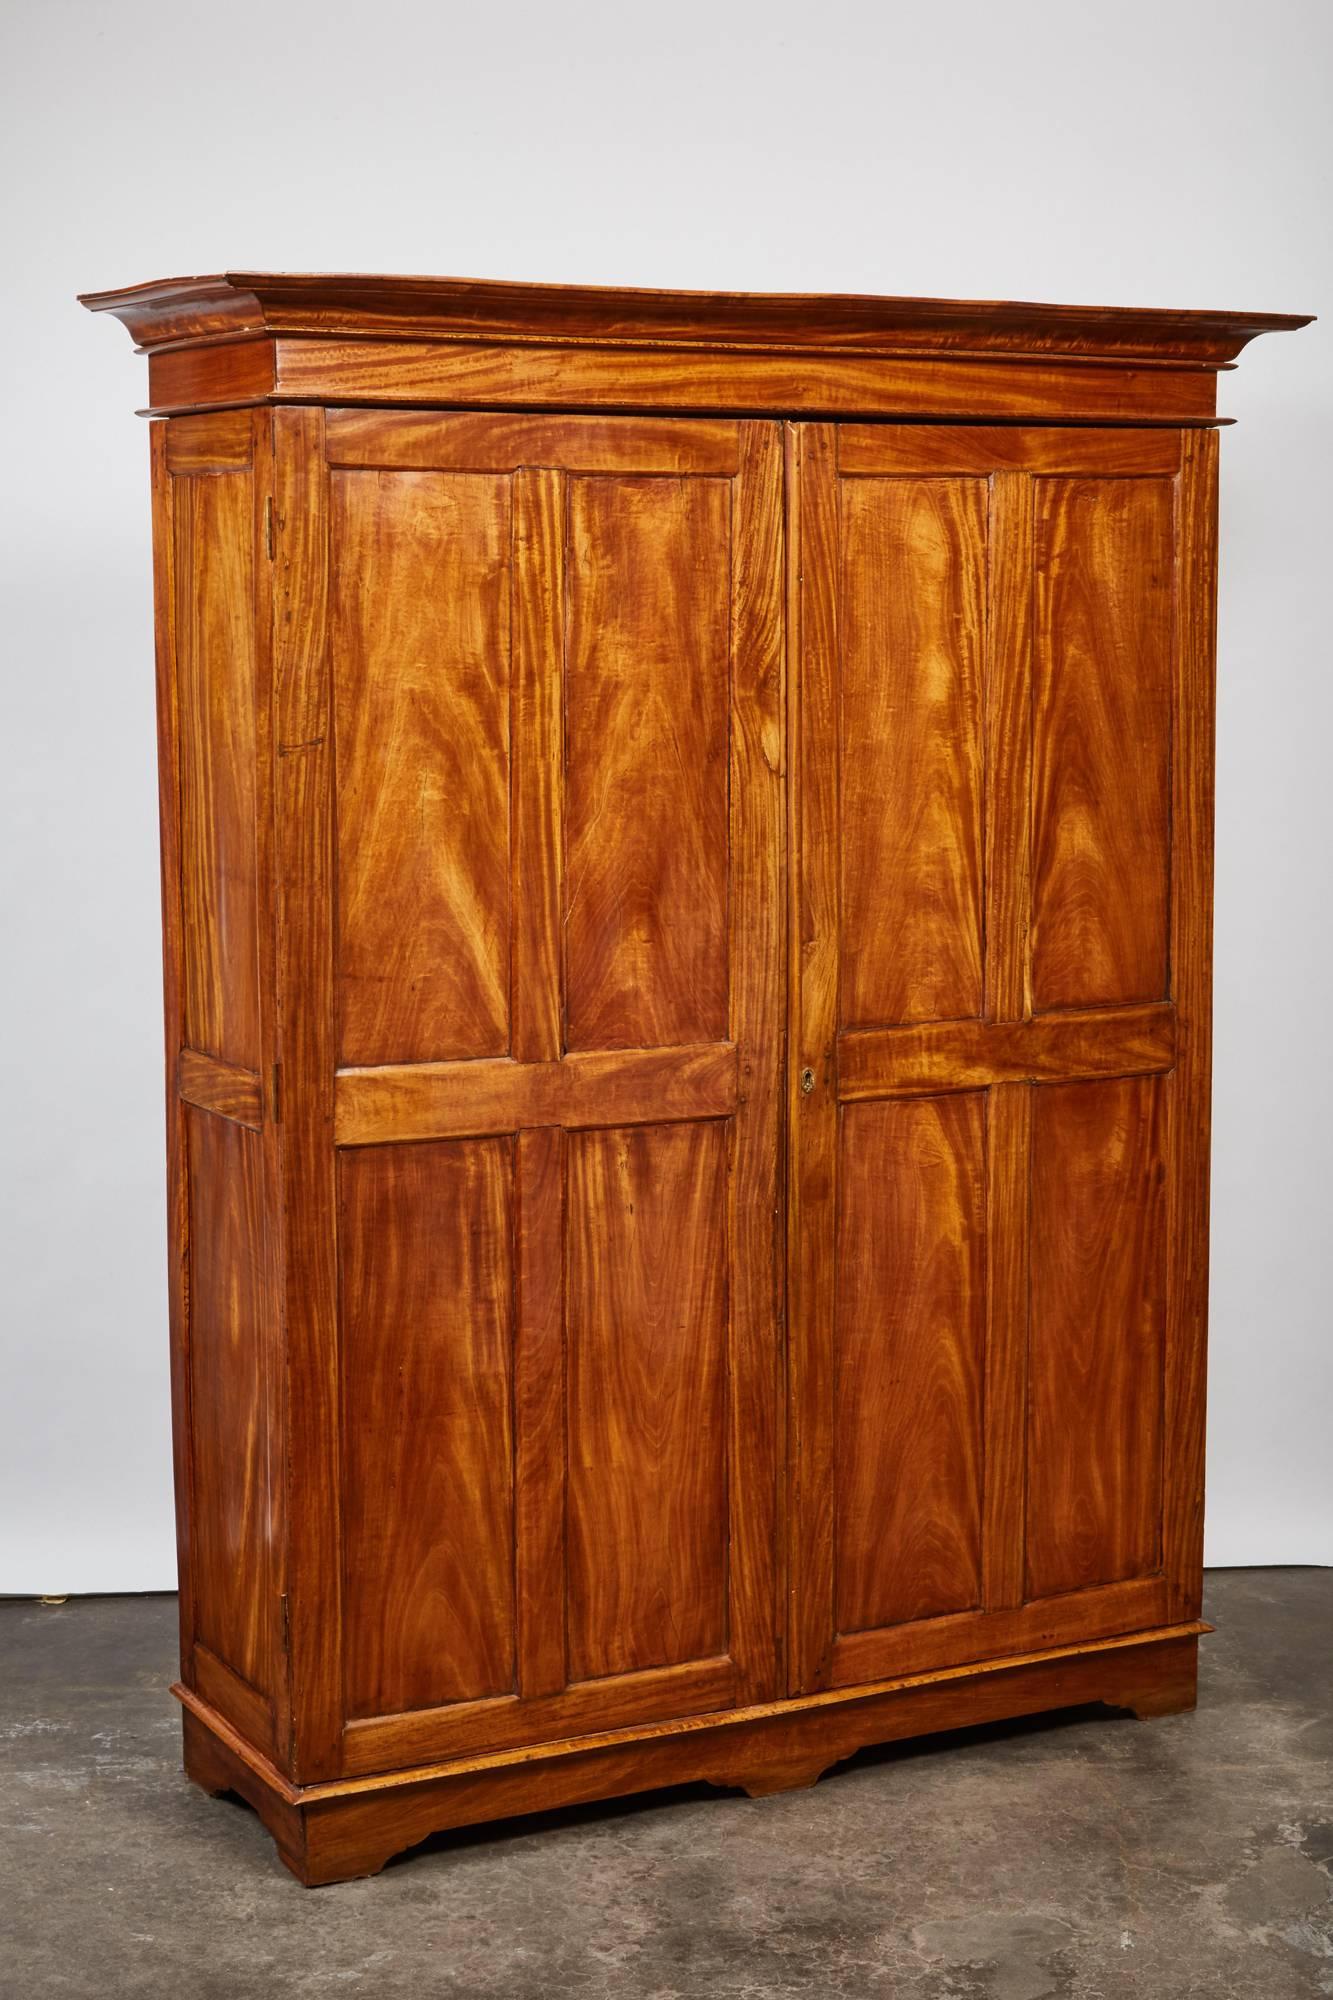 This simple yet elegant two-door satinwood cabinet from 19th century British Colonial Sri Lanka has a pair of eight carved wood panel doors and sits on a set of six rectangular legs.